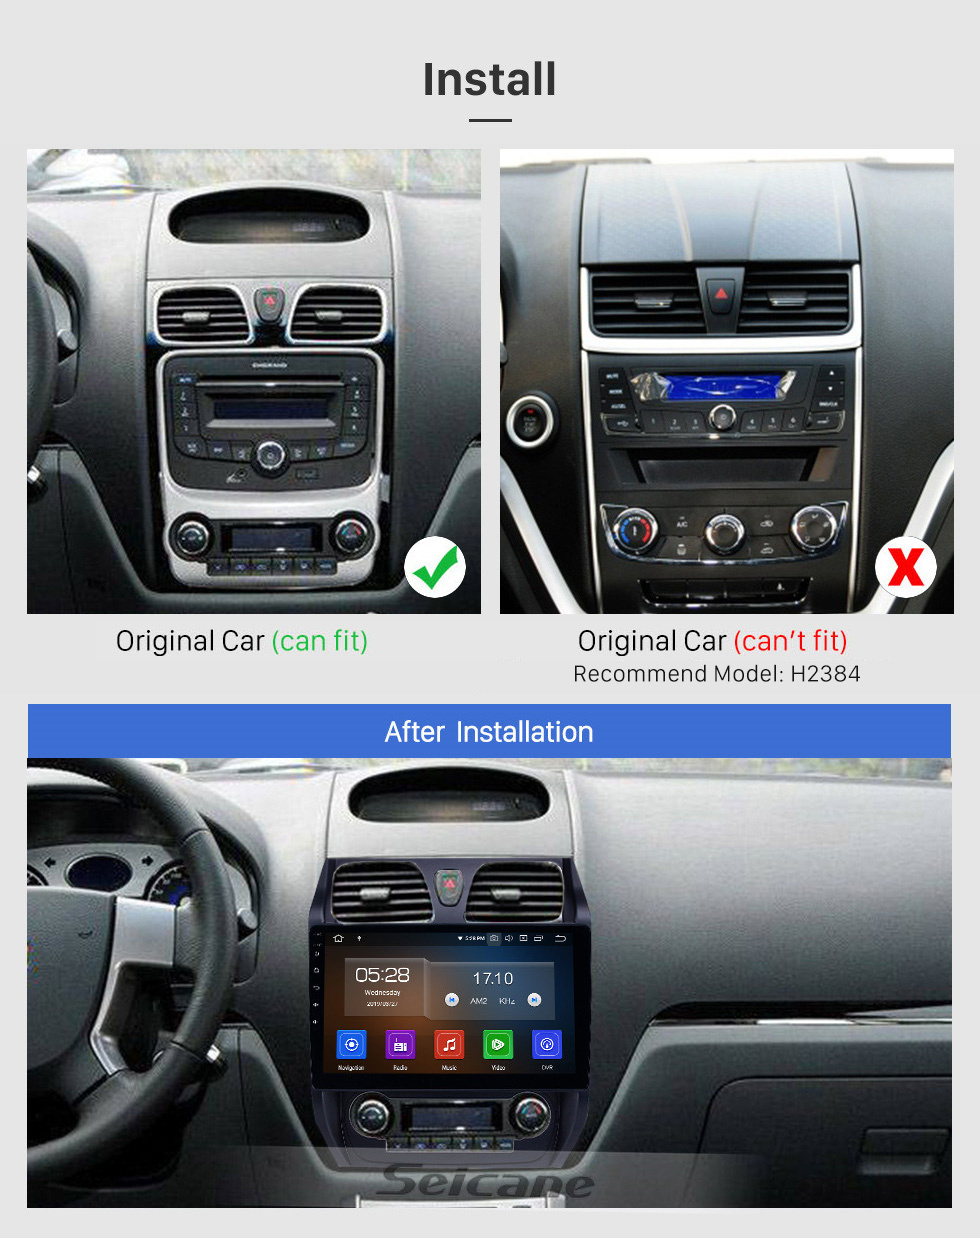 Seicane 10.1 inch Android 10.0 GPS Navigation Radio for 2012-2013 Geely Emgrand EC7 with HD Touchscreen Carplay AUX Bluetooth support 1080P